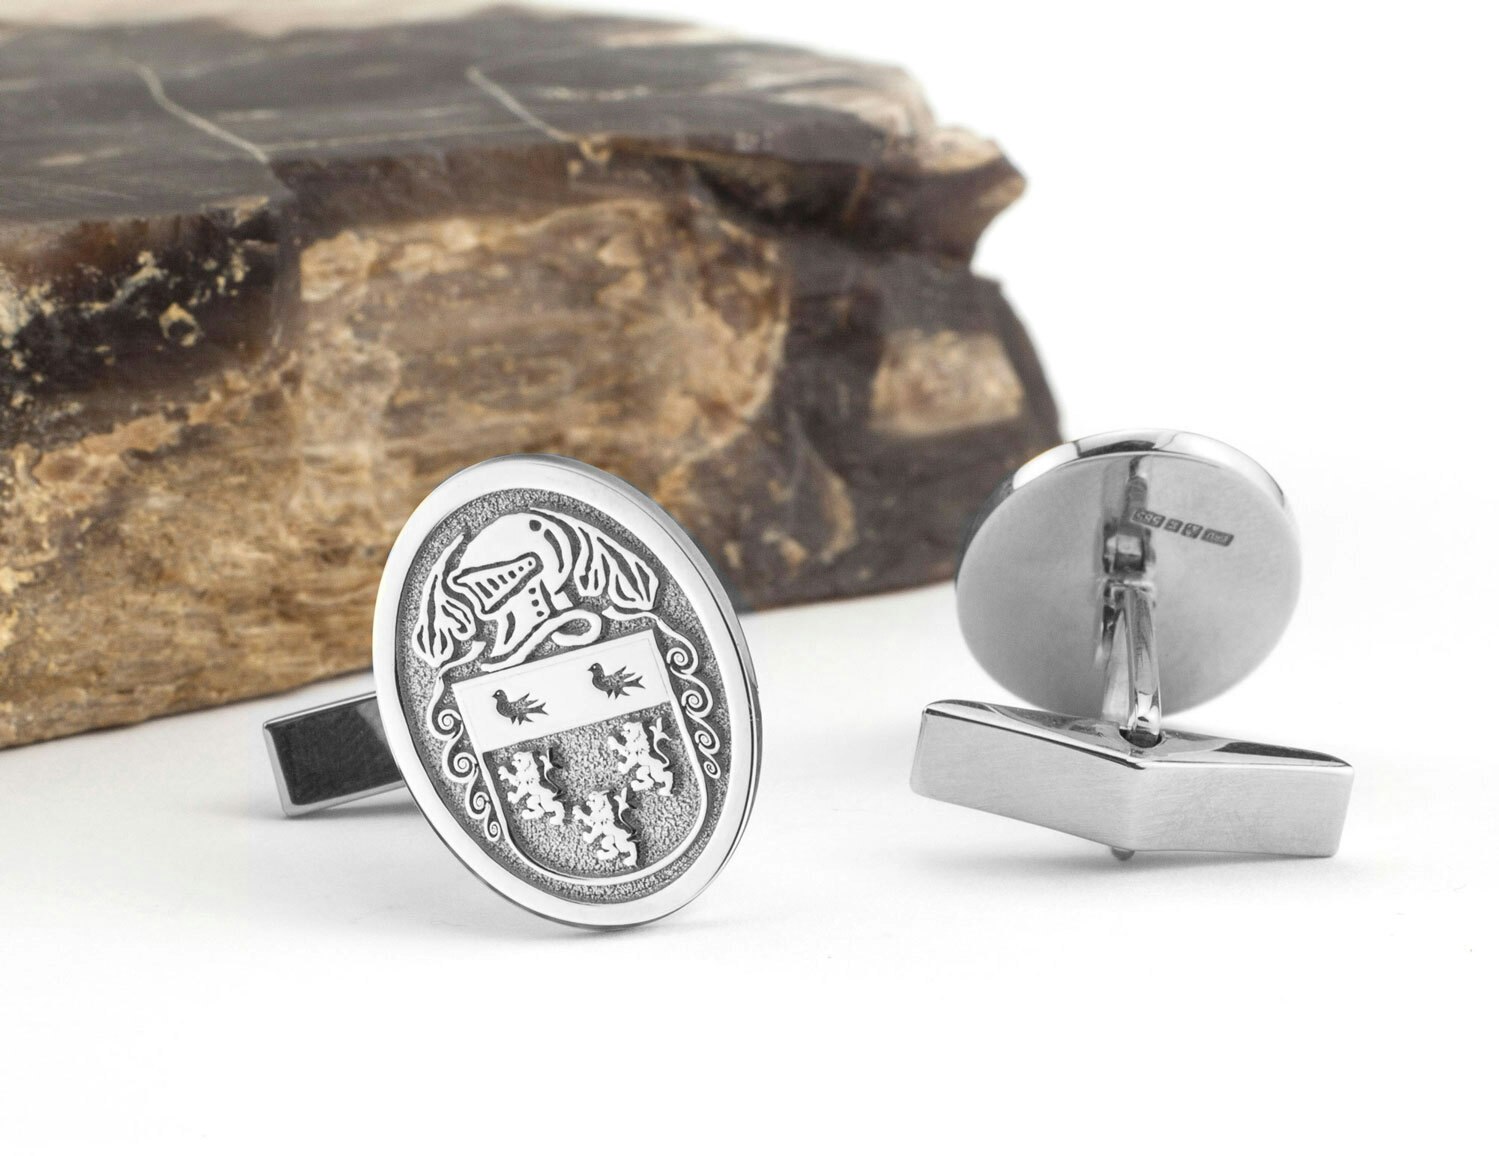 Select Gifts Mcardle Ireland Heraldry Crest Sterling Silver Cufflinks Engraved Message Box 